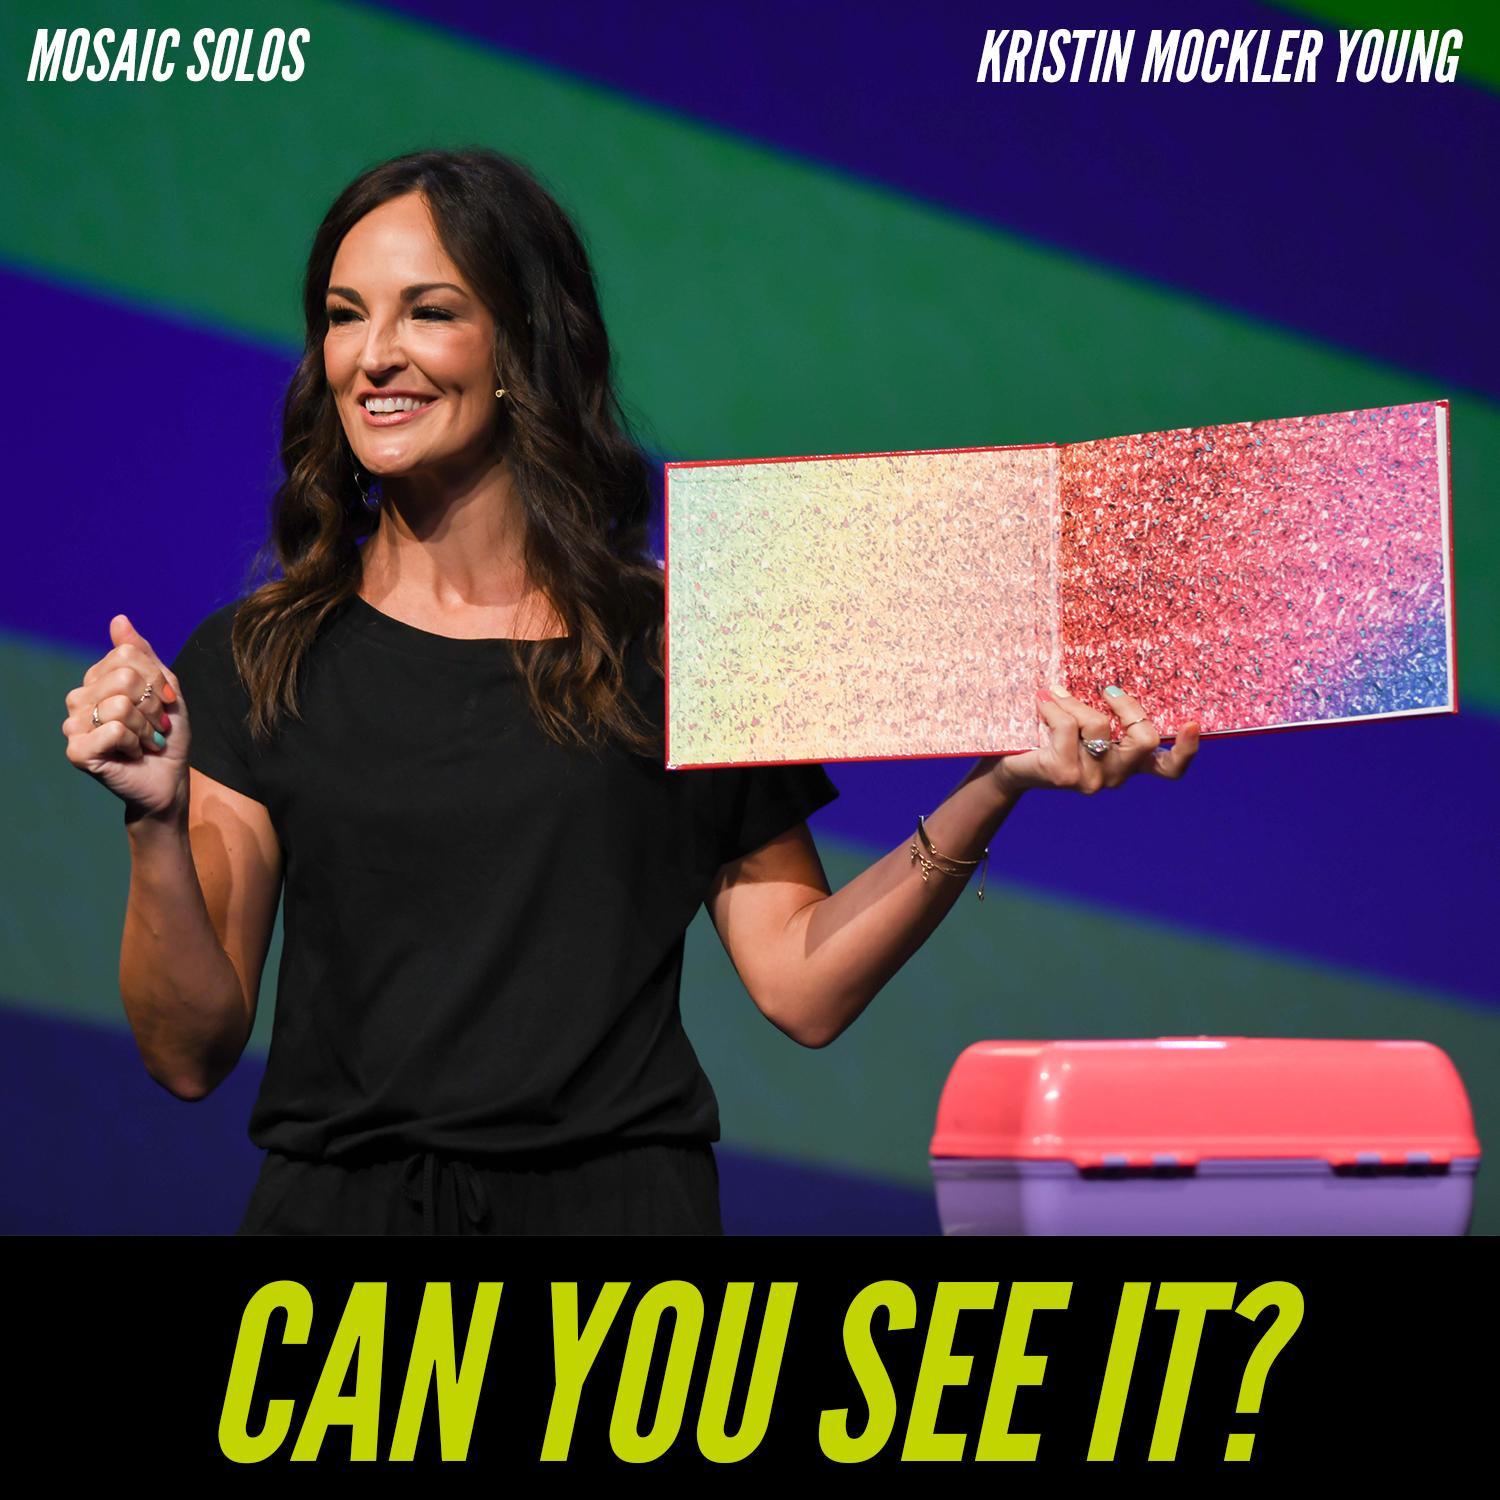 Can You See It? - Kristin Mockler Young